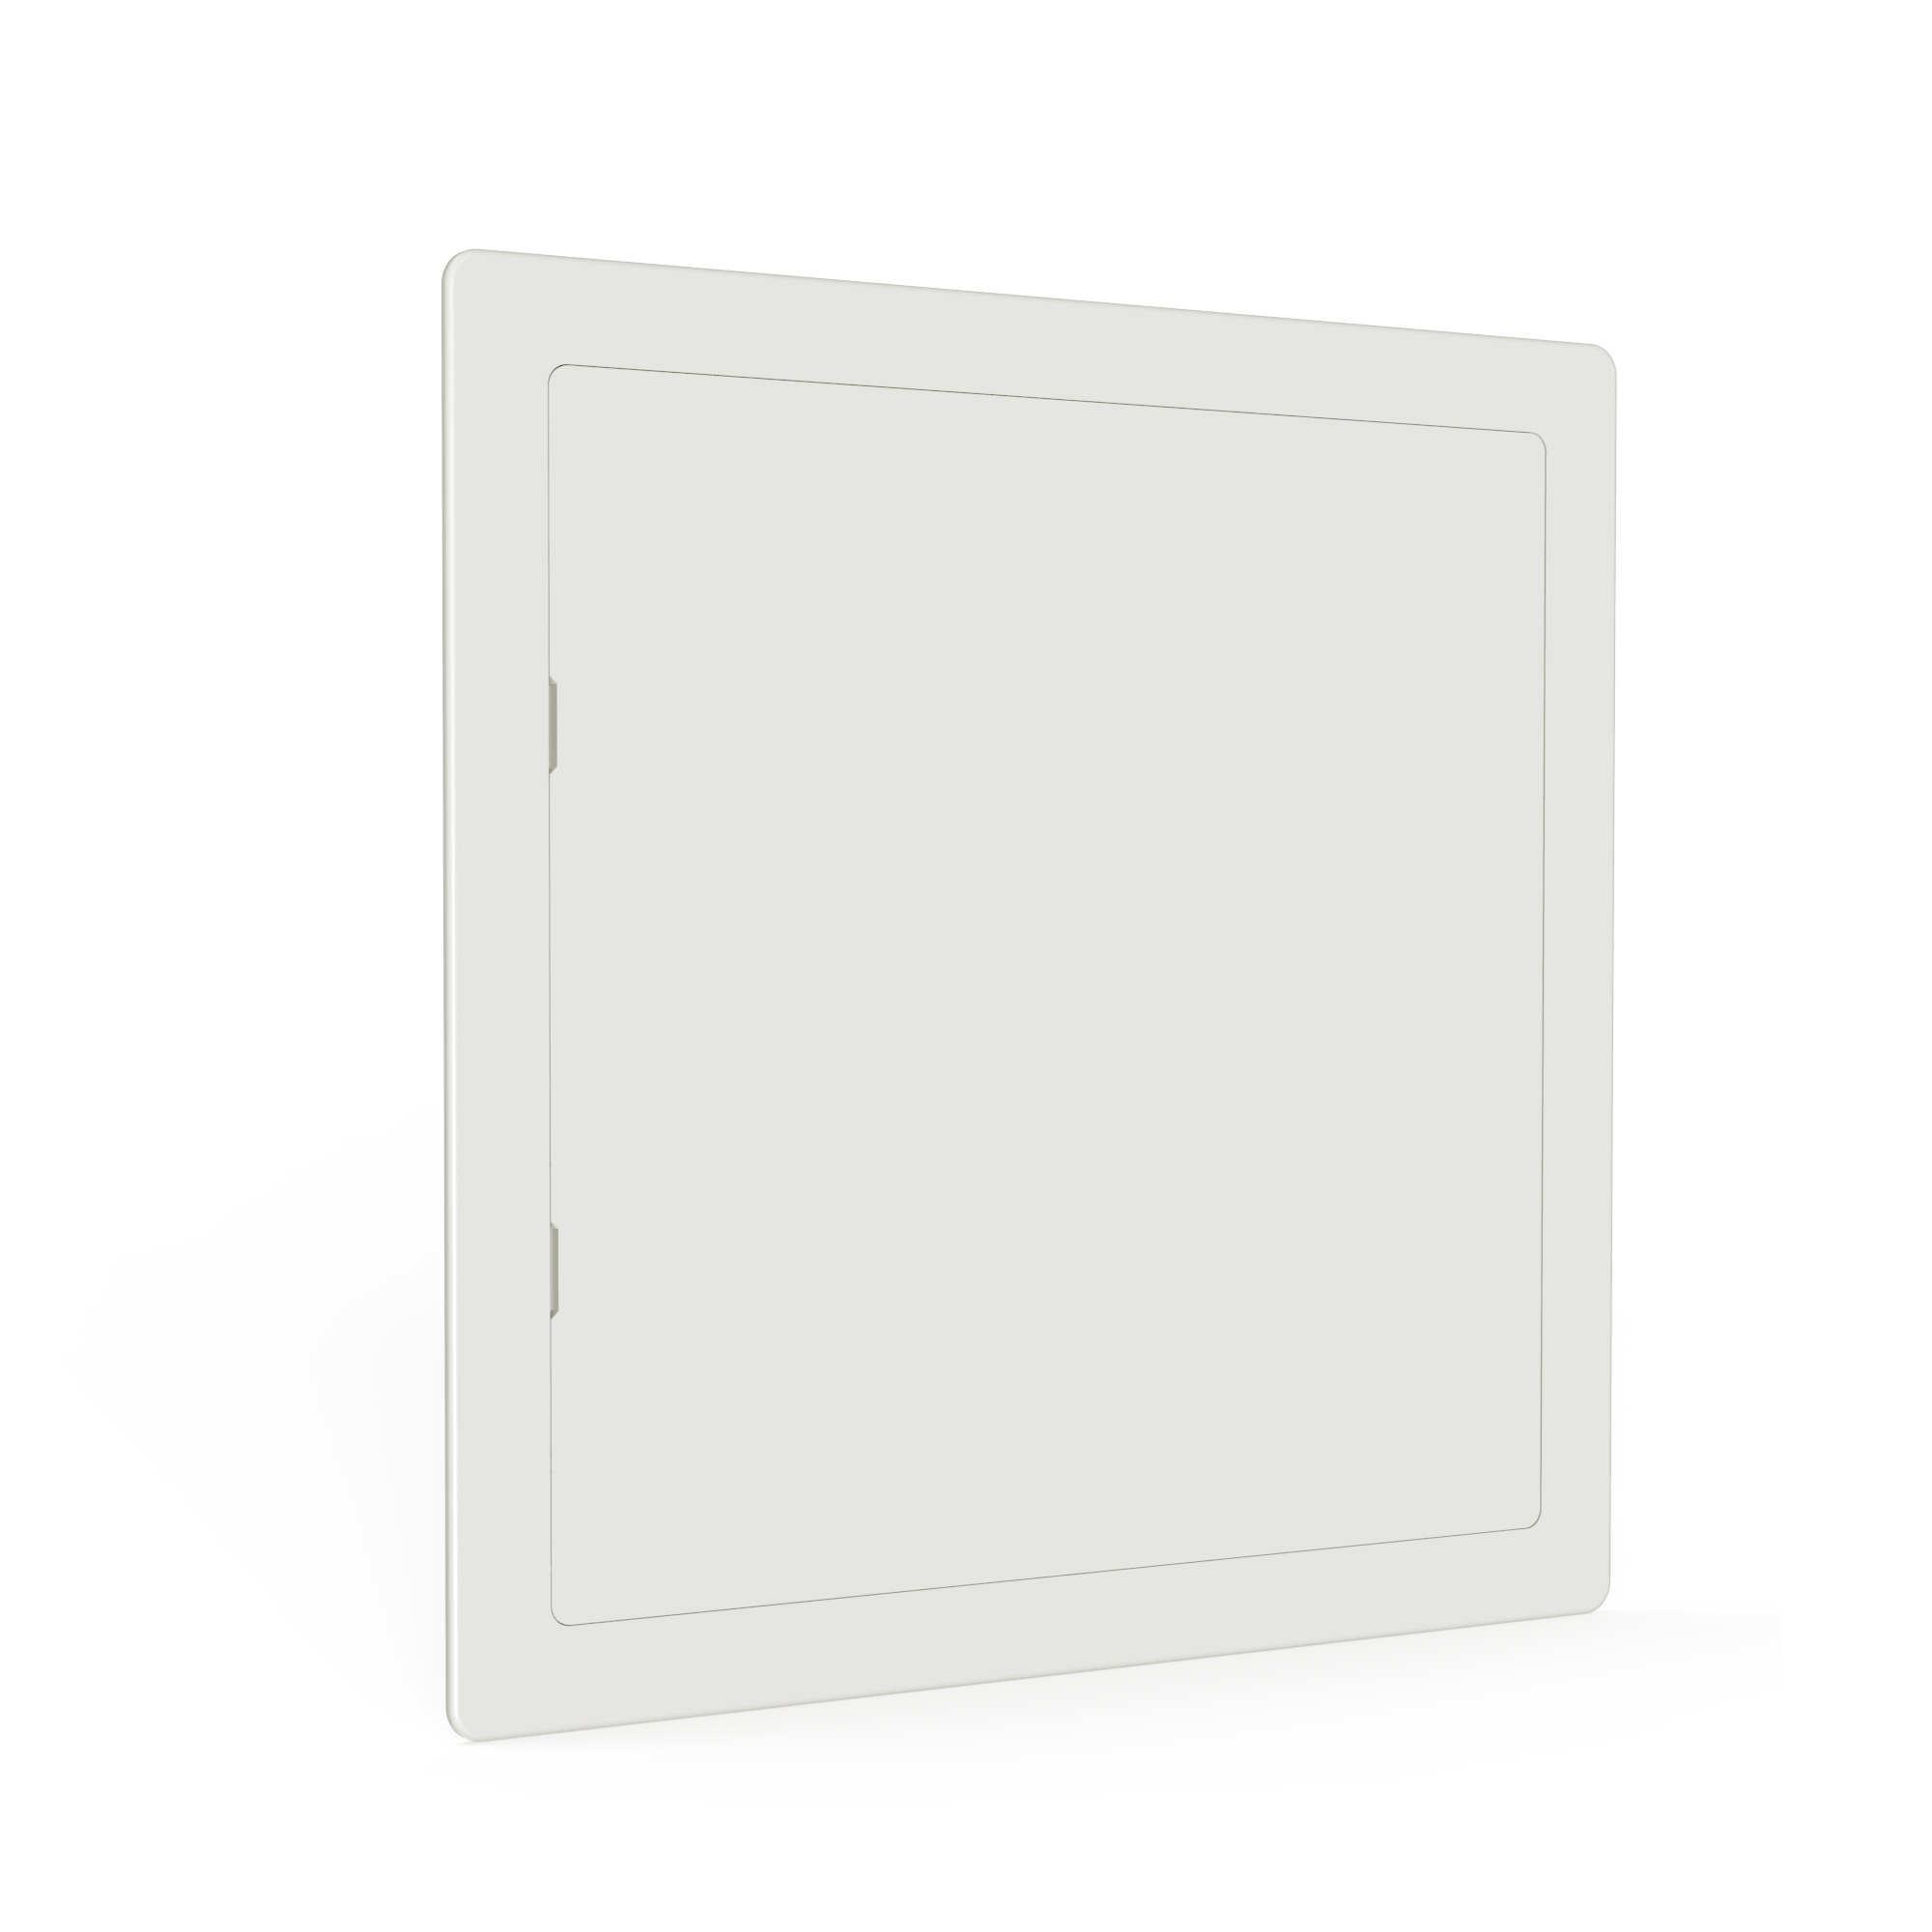 Where ABS access panel can be mounted ?